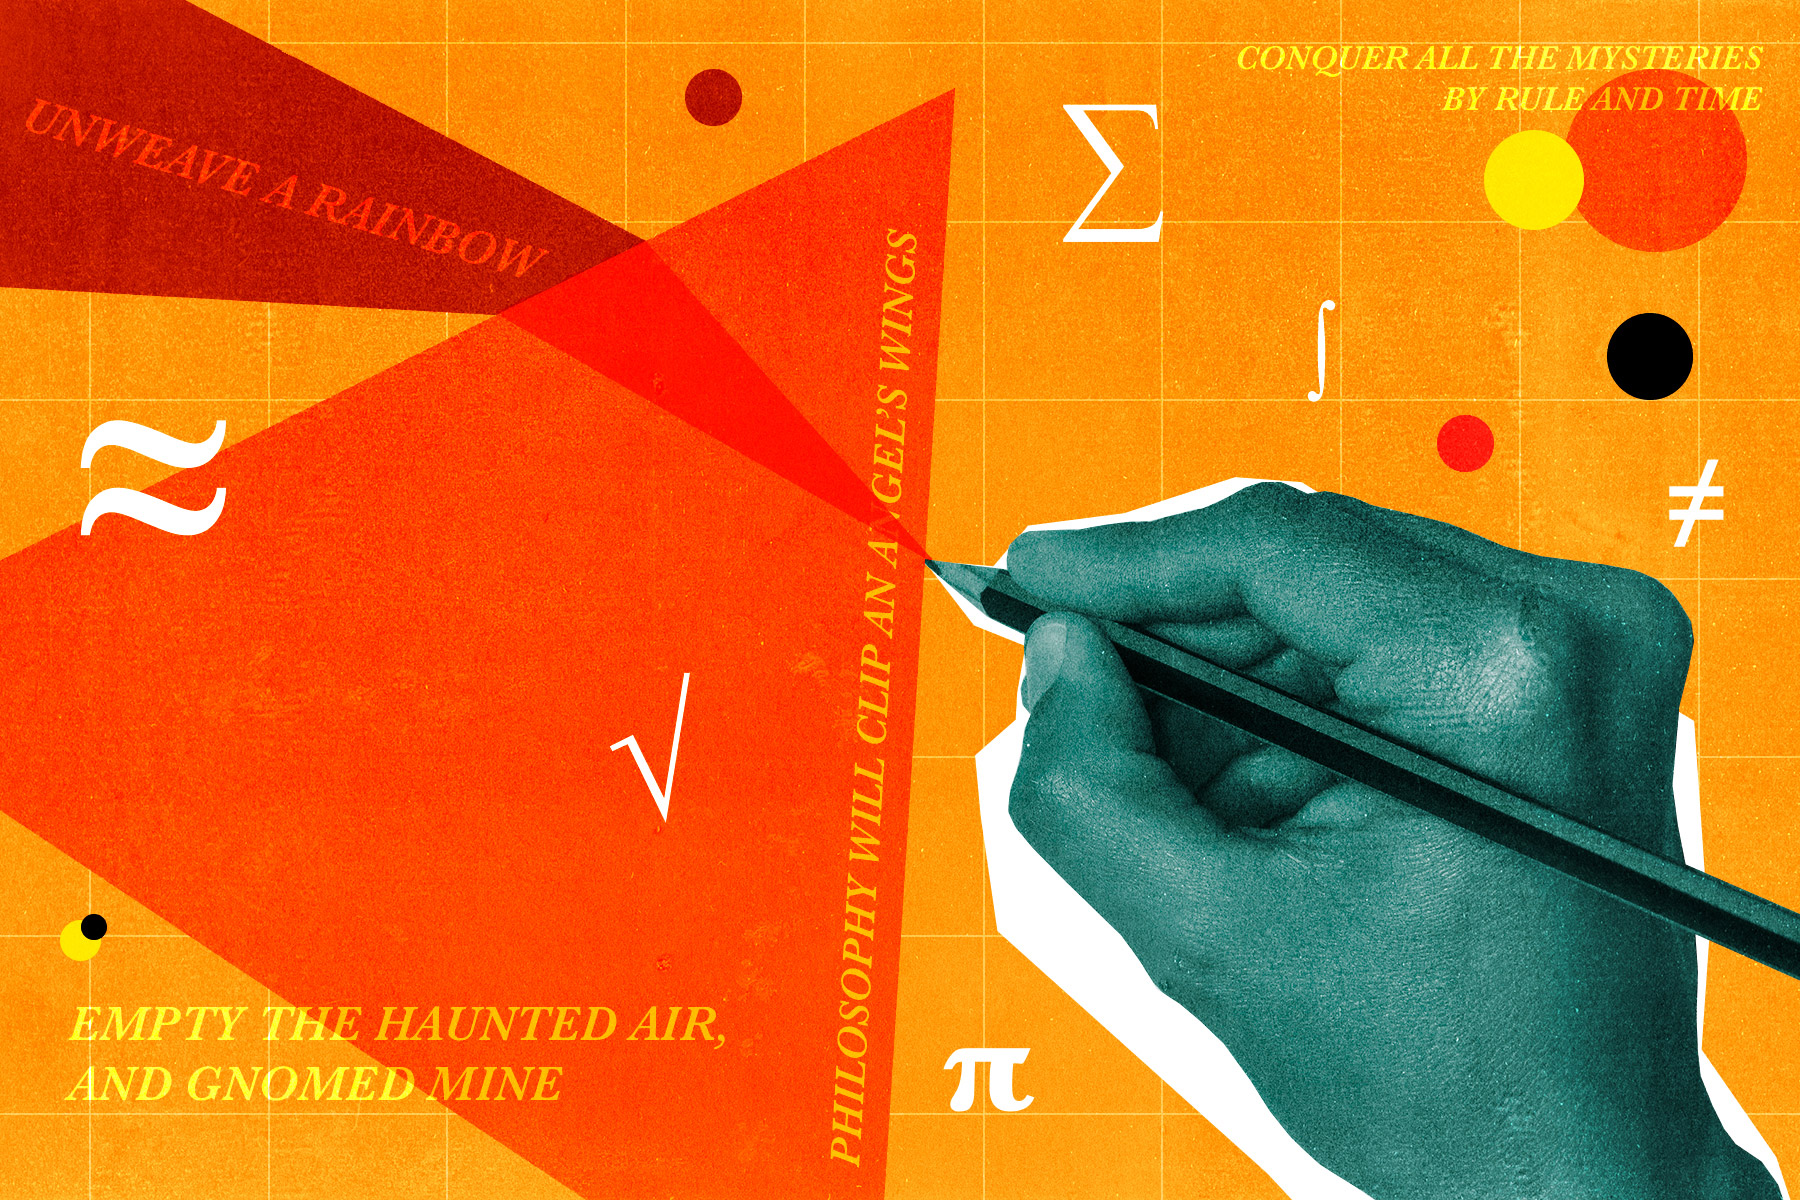 A stylised photo collage in which a green hand, against a host of orange mathematical, constructs a poem using maths.